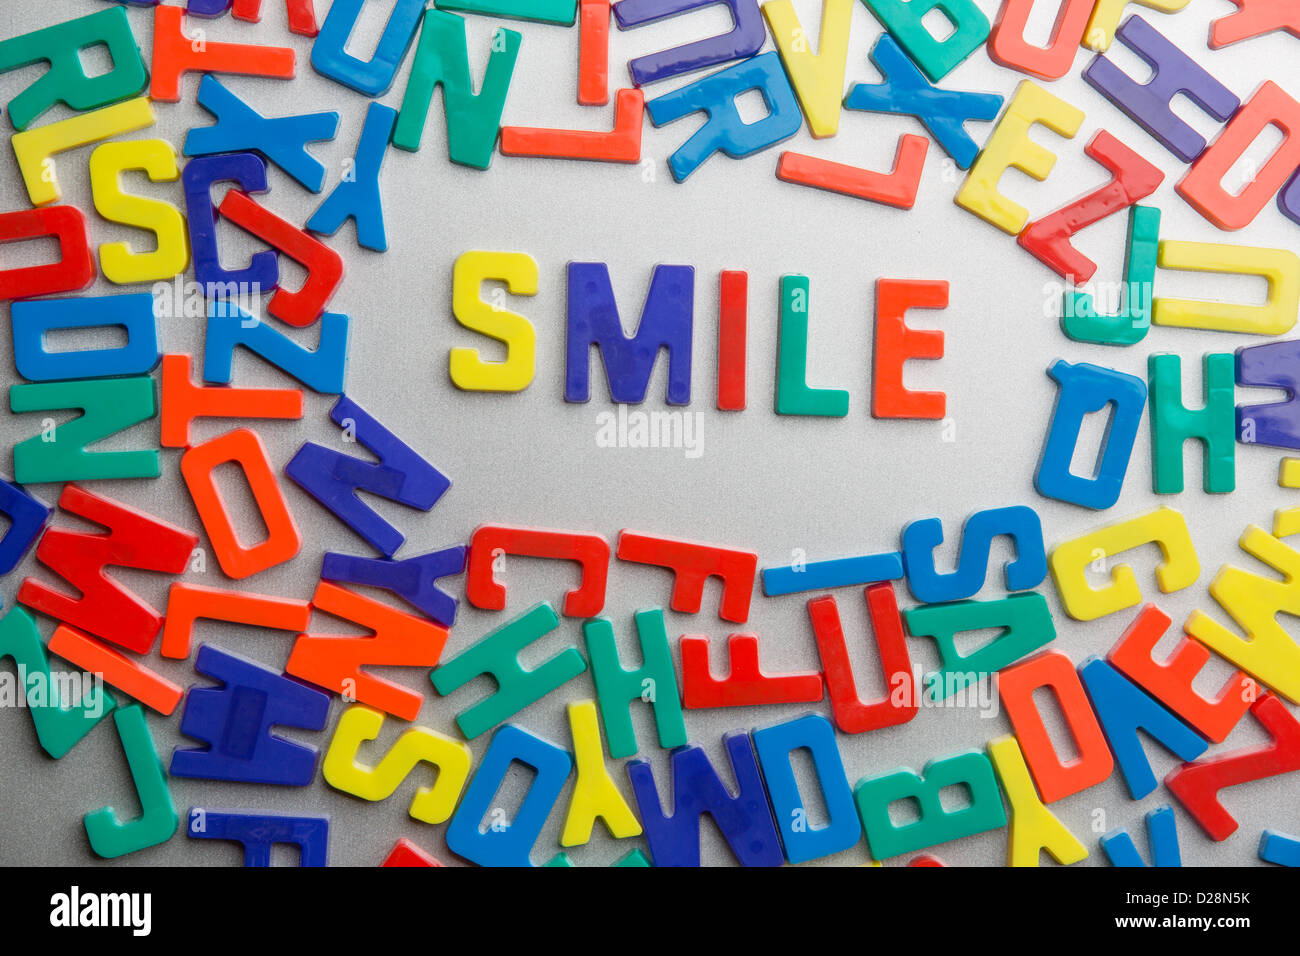 'Smile' - Refrigerator magnets spell a message out of a jumble of letters Stock Photo